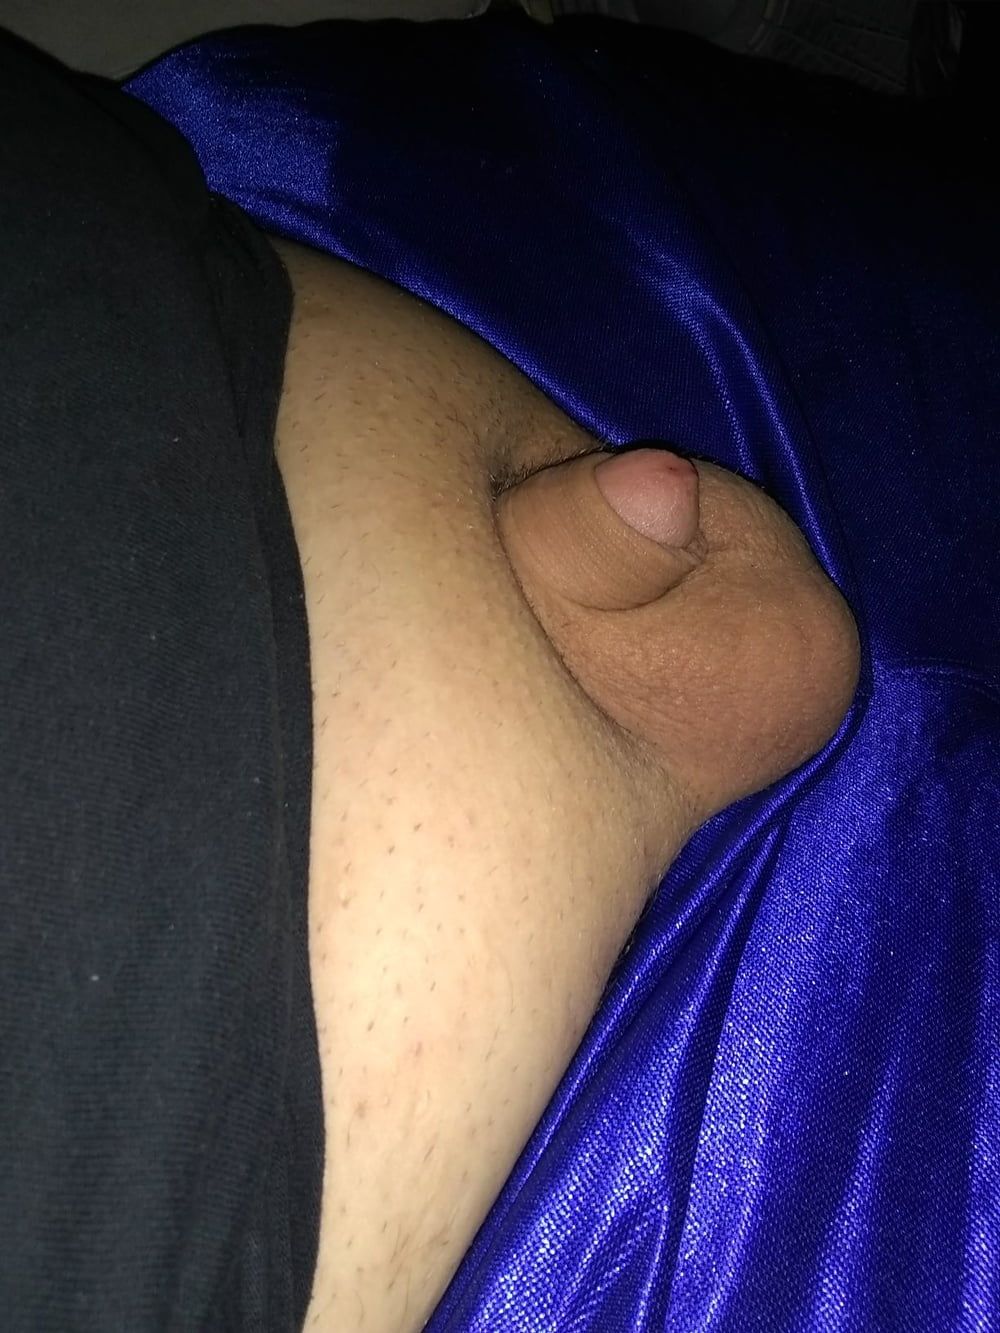 newer pics of my penis or balls #18